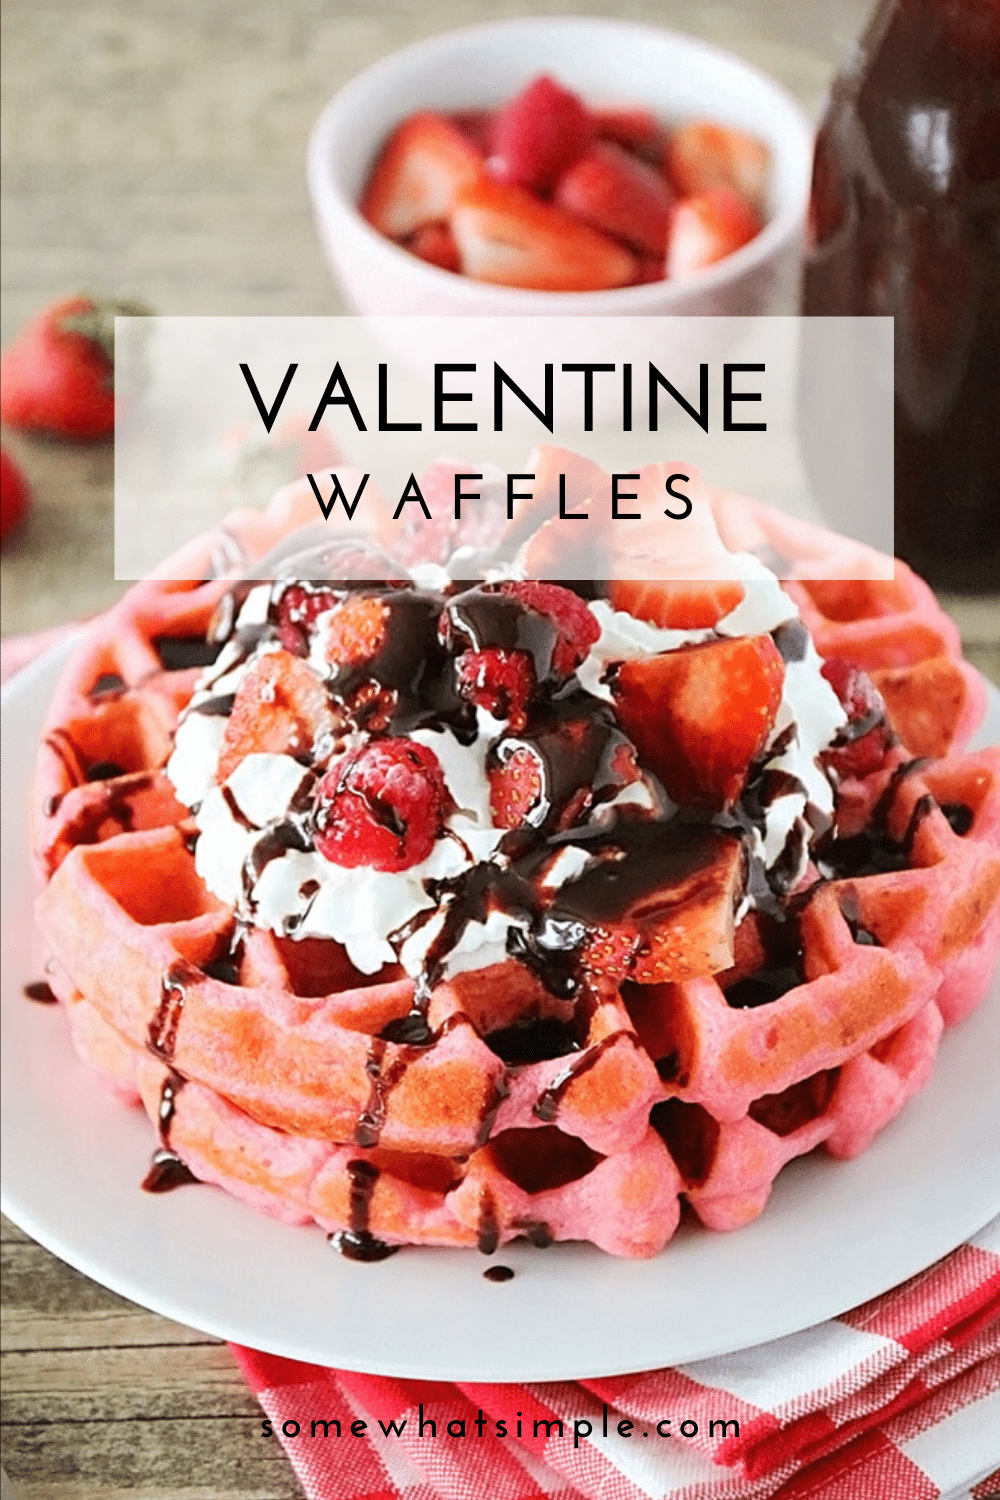 These pink velvet waffles are so fun for Valentine's Day, and so quick and easy to make! Who would love a delicious pink waffle to celebrate any romantic occasion. These waffles turn out soft and fluffy every time! via @somewhatsimple